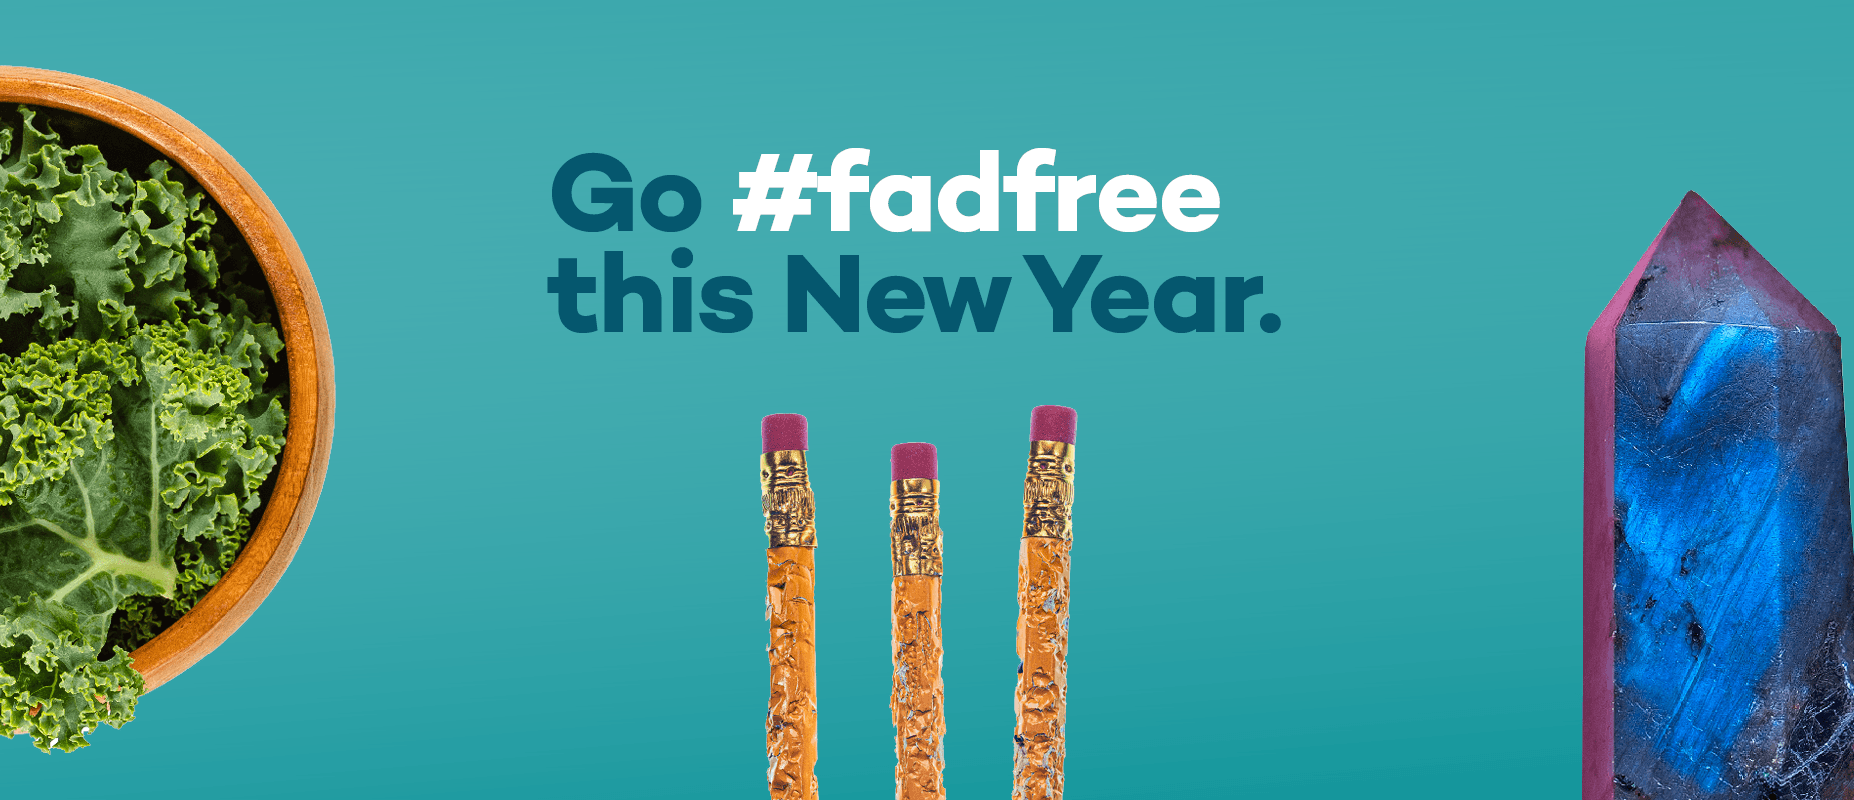 Go #FadFree this New Year